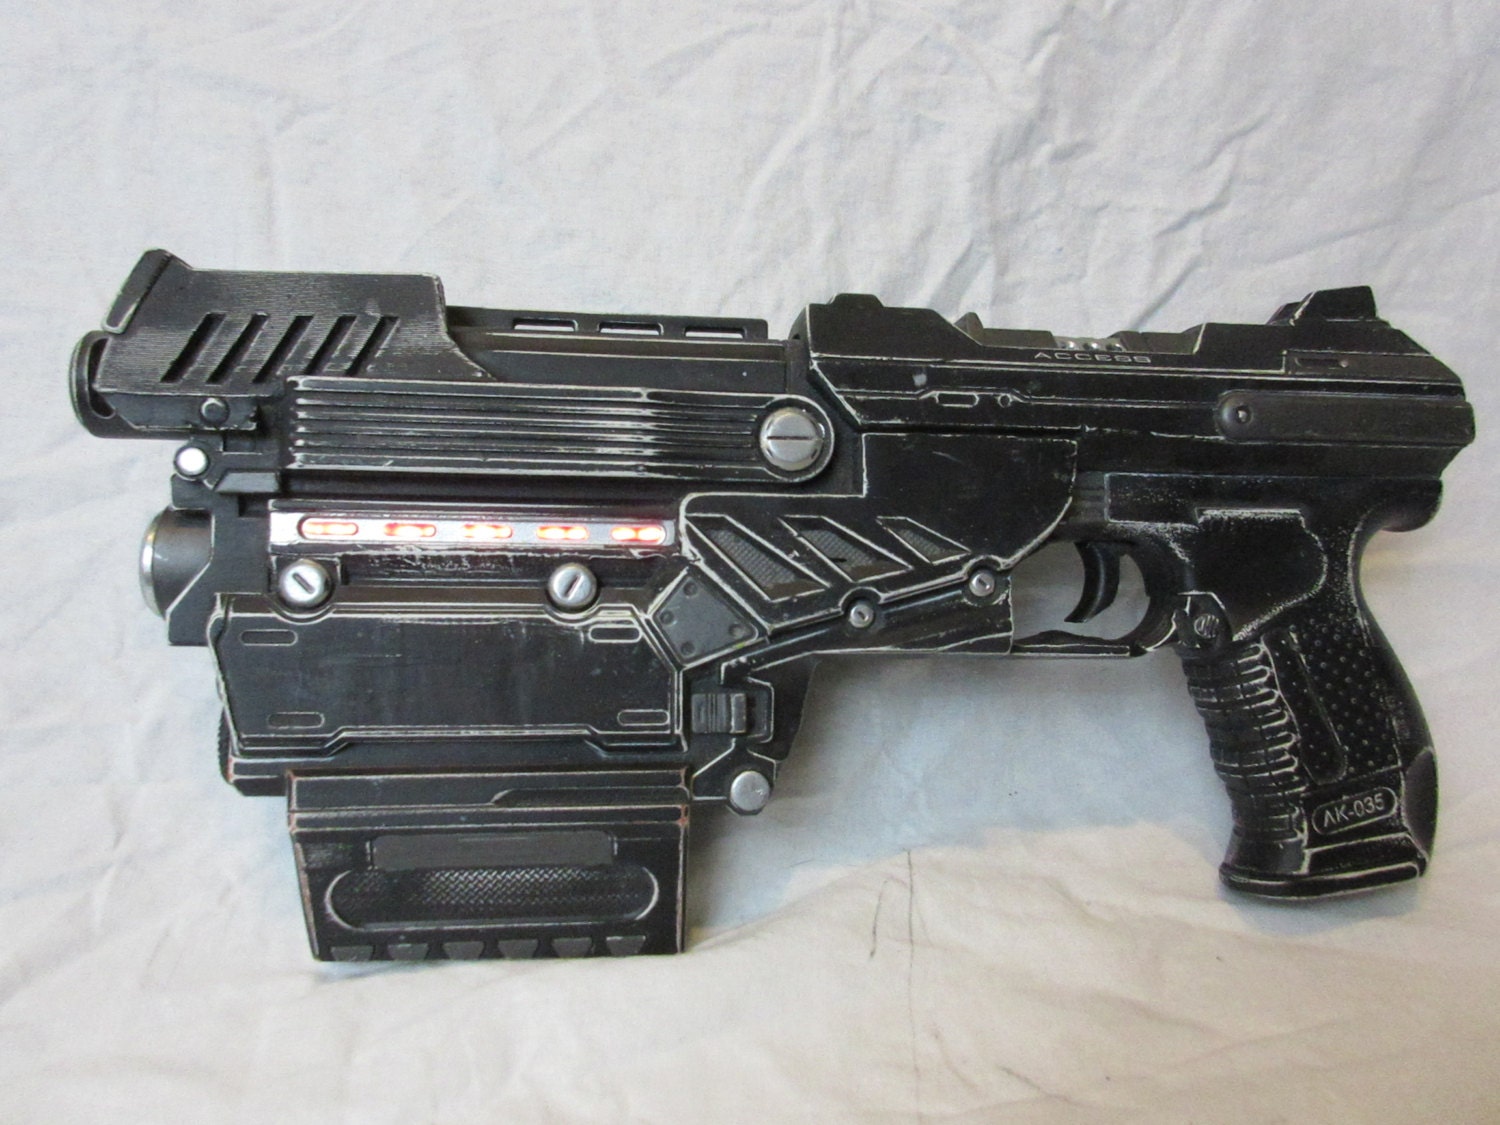 Judge Dredd Style Lawgiver Law Giver Electronic Cosplay Gun